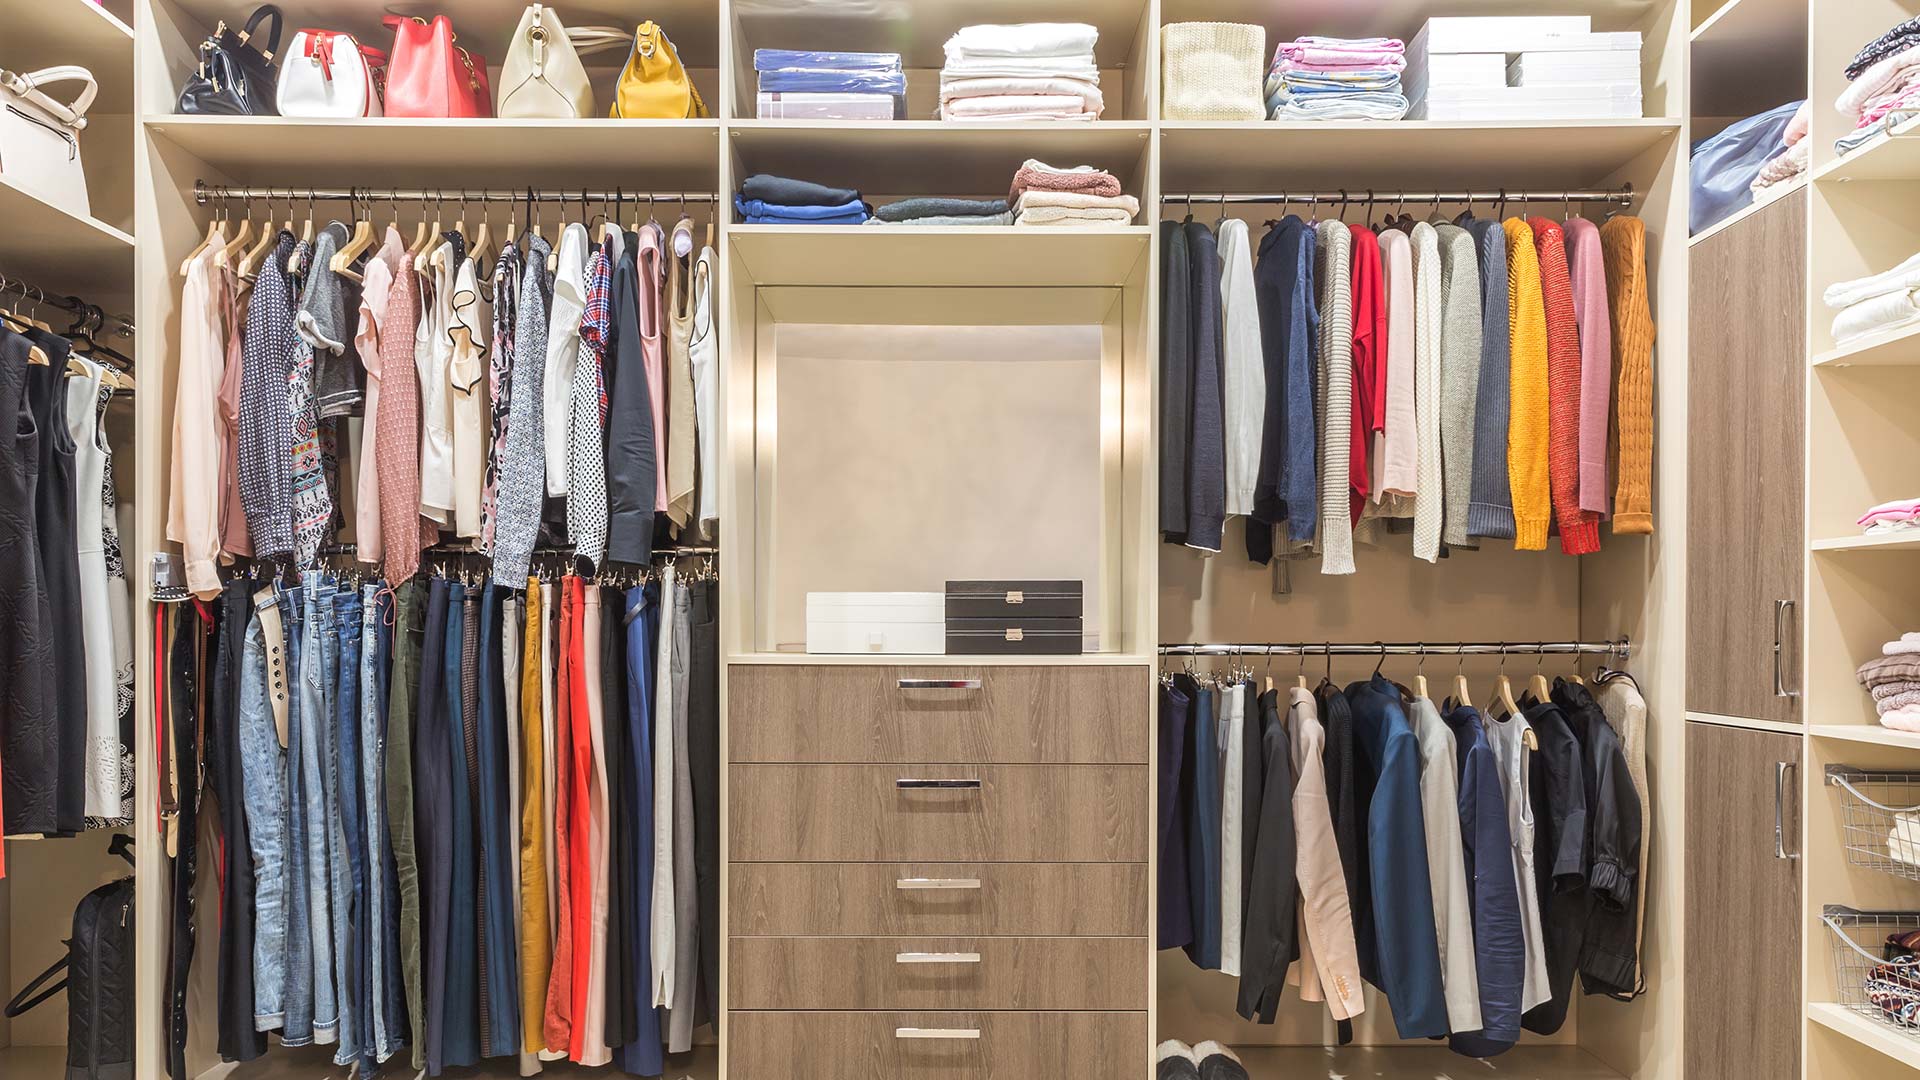 Closet Organization: How to Store Seasonal Clothes | Today's Homeowner